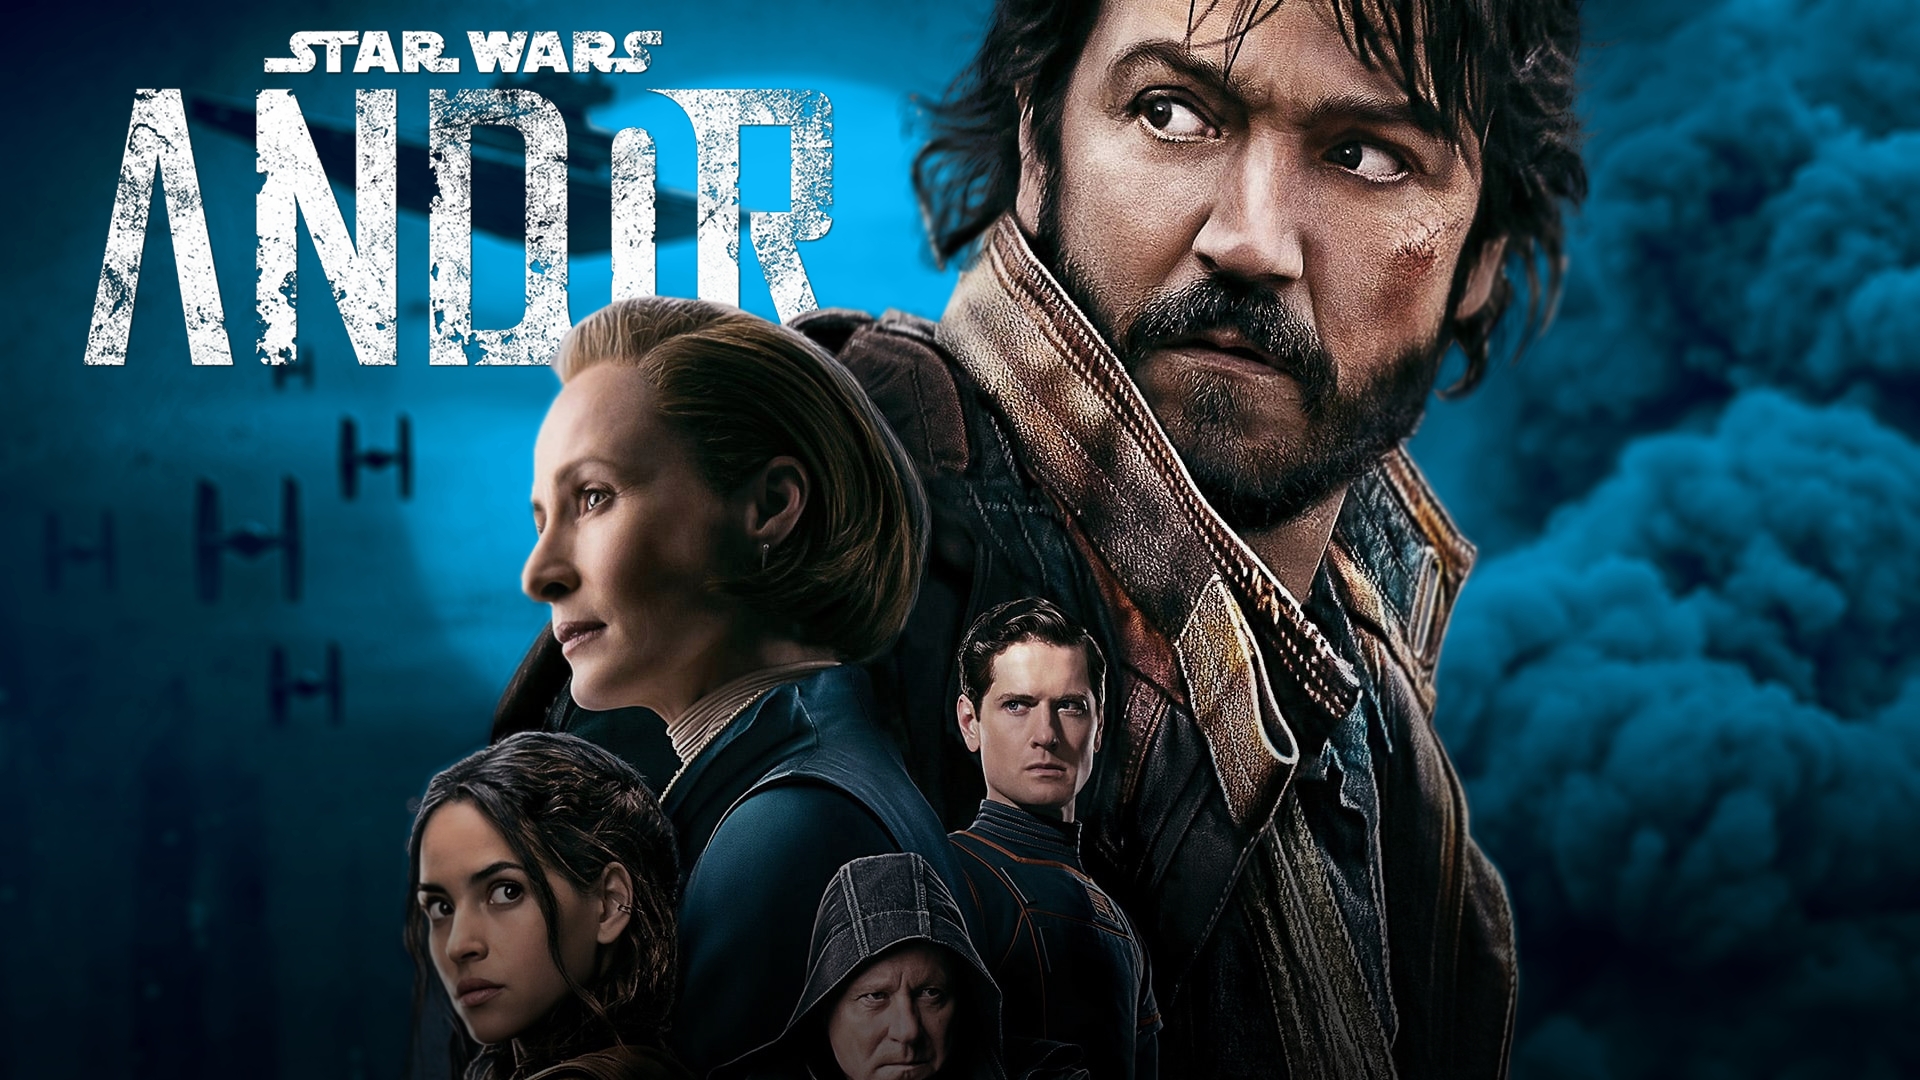 Andor could be the best Star Wars story yet